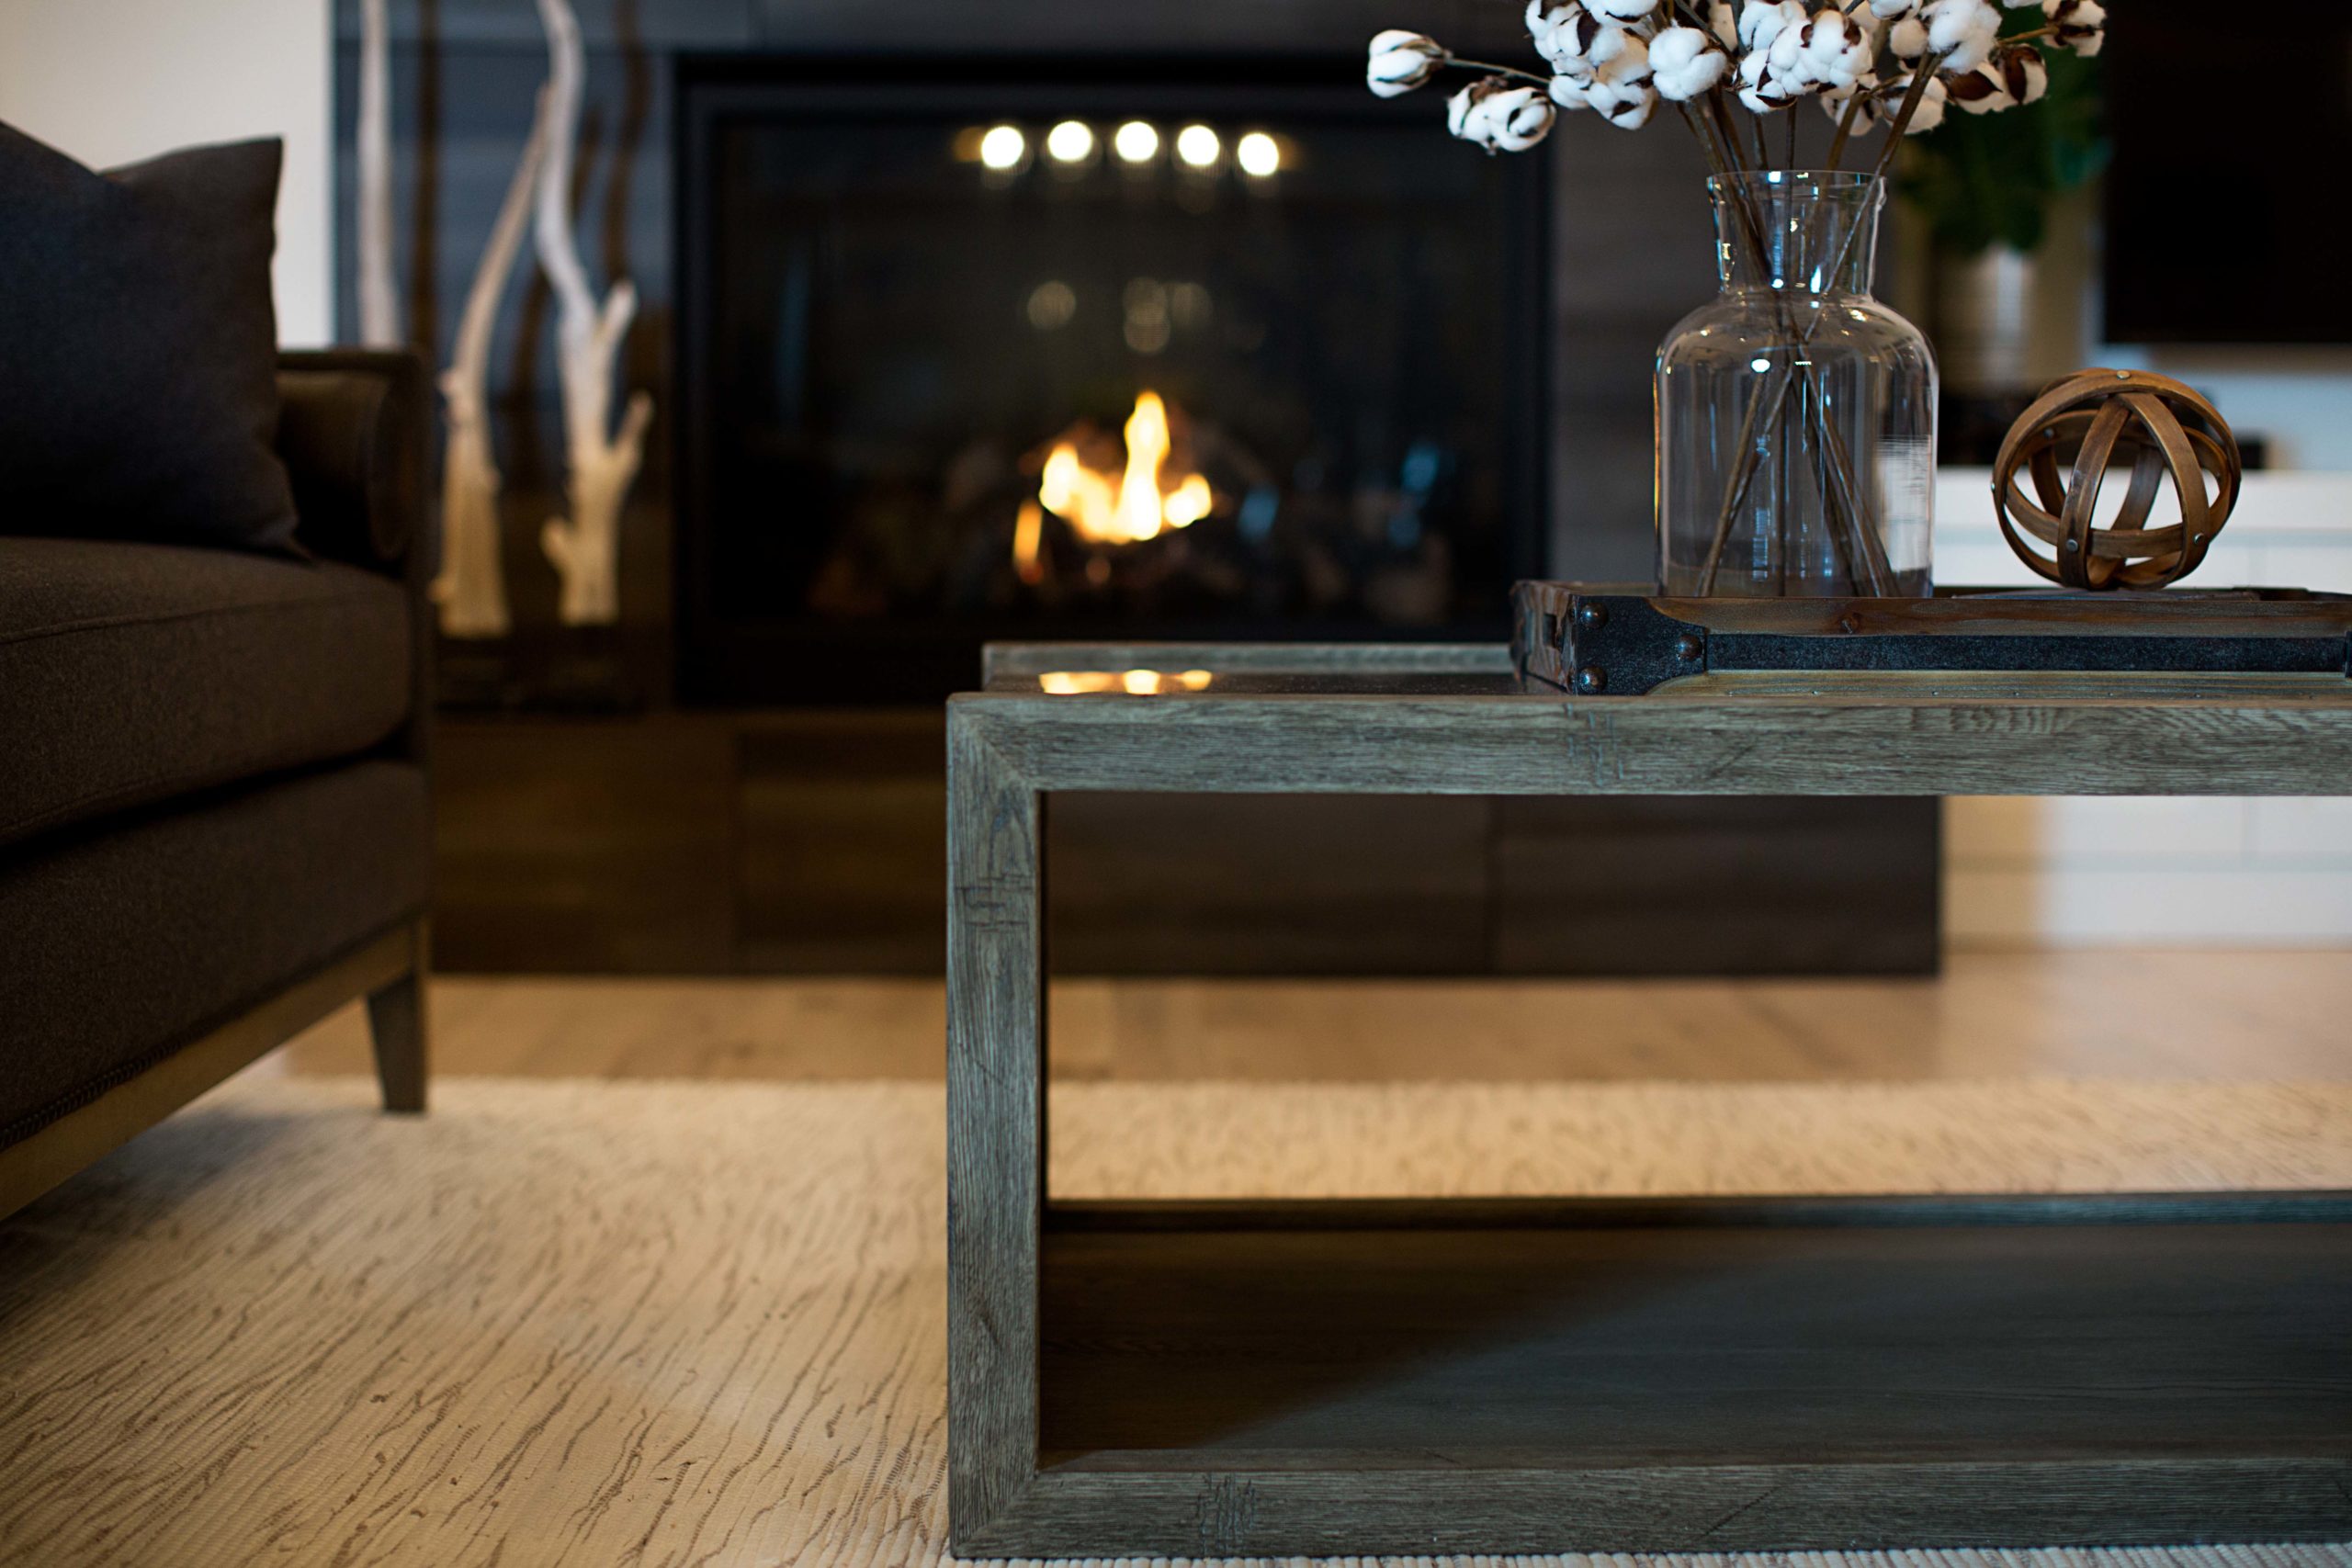 Dark wood coffee table with unique accessories near fireplace.